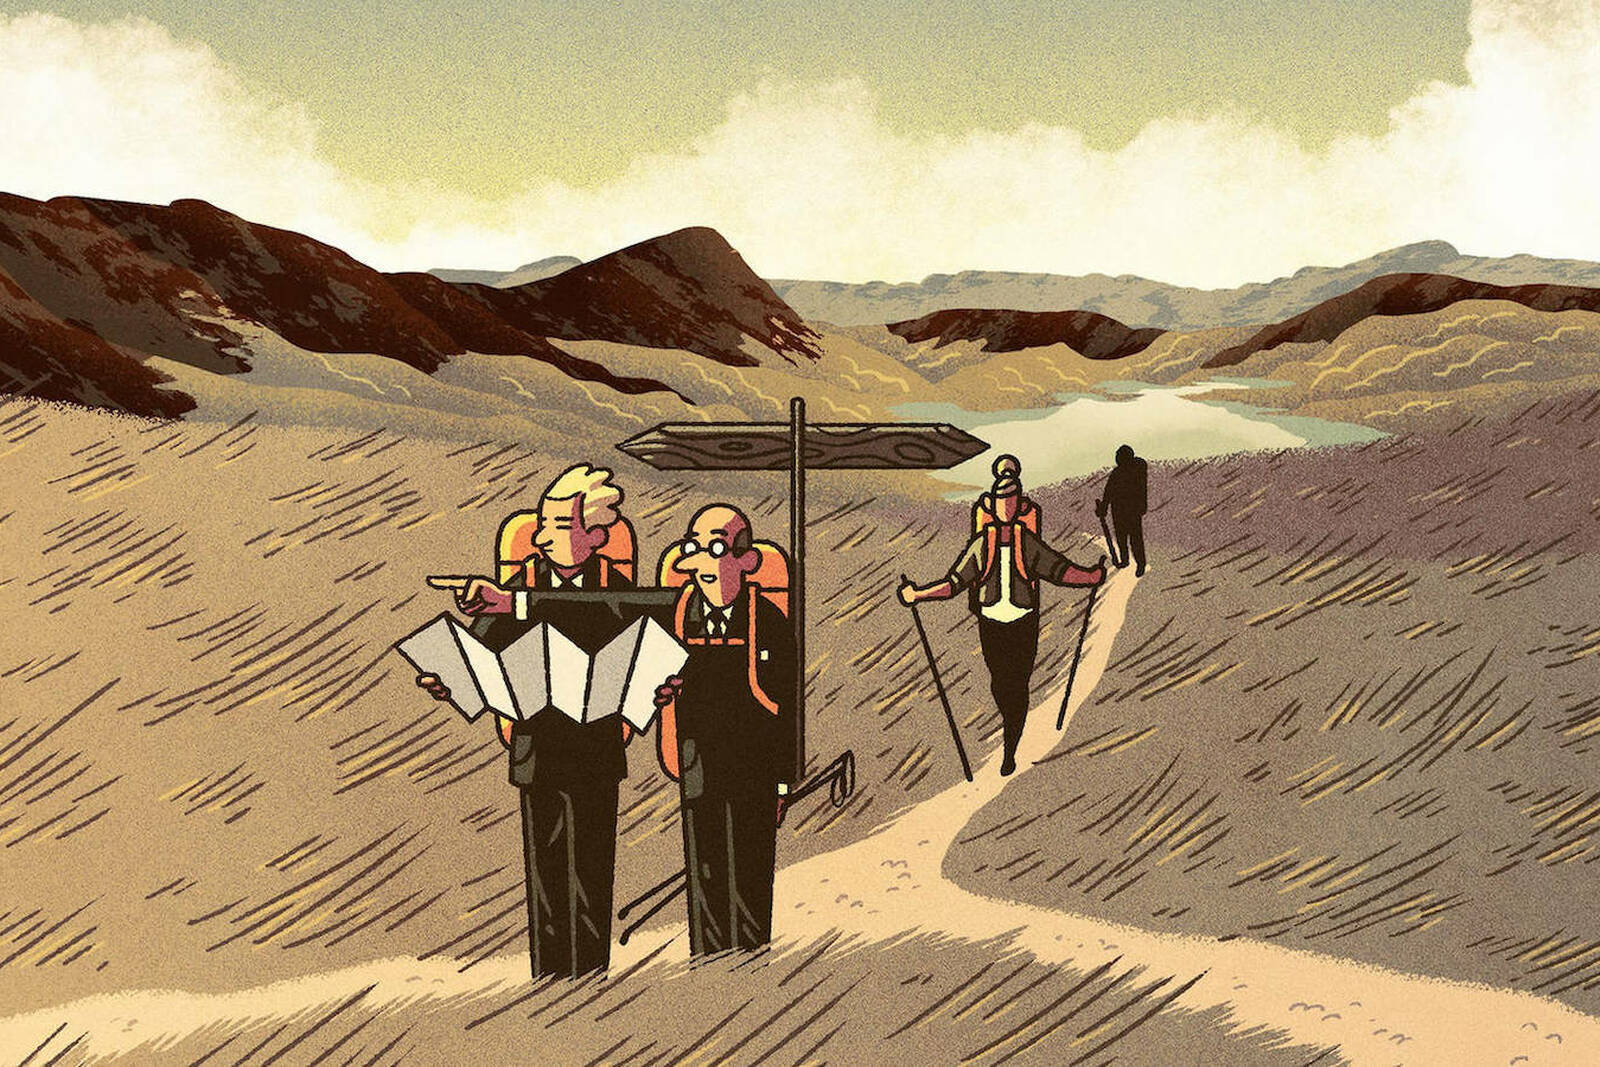 A leader stands at a fork in the road, pointing towards one of the two paths.